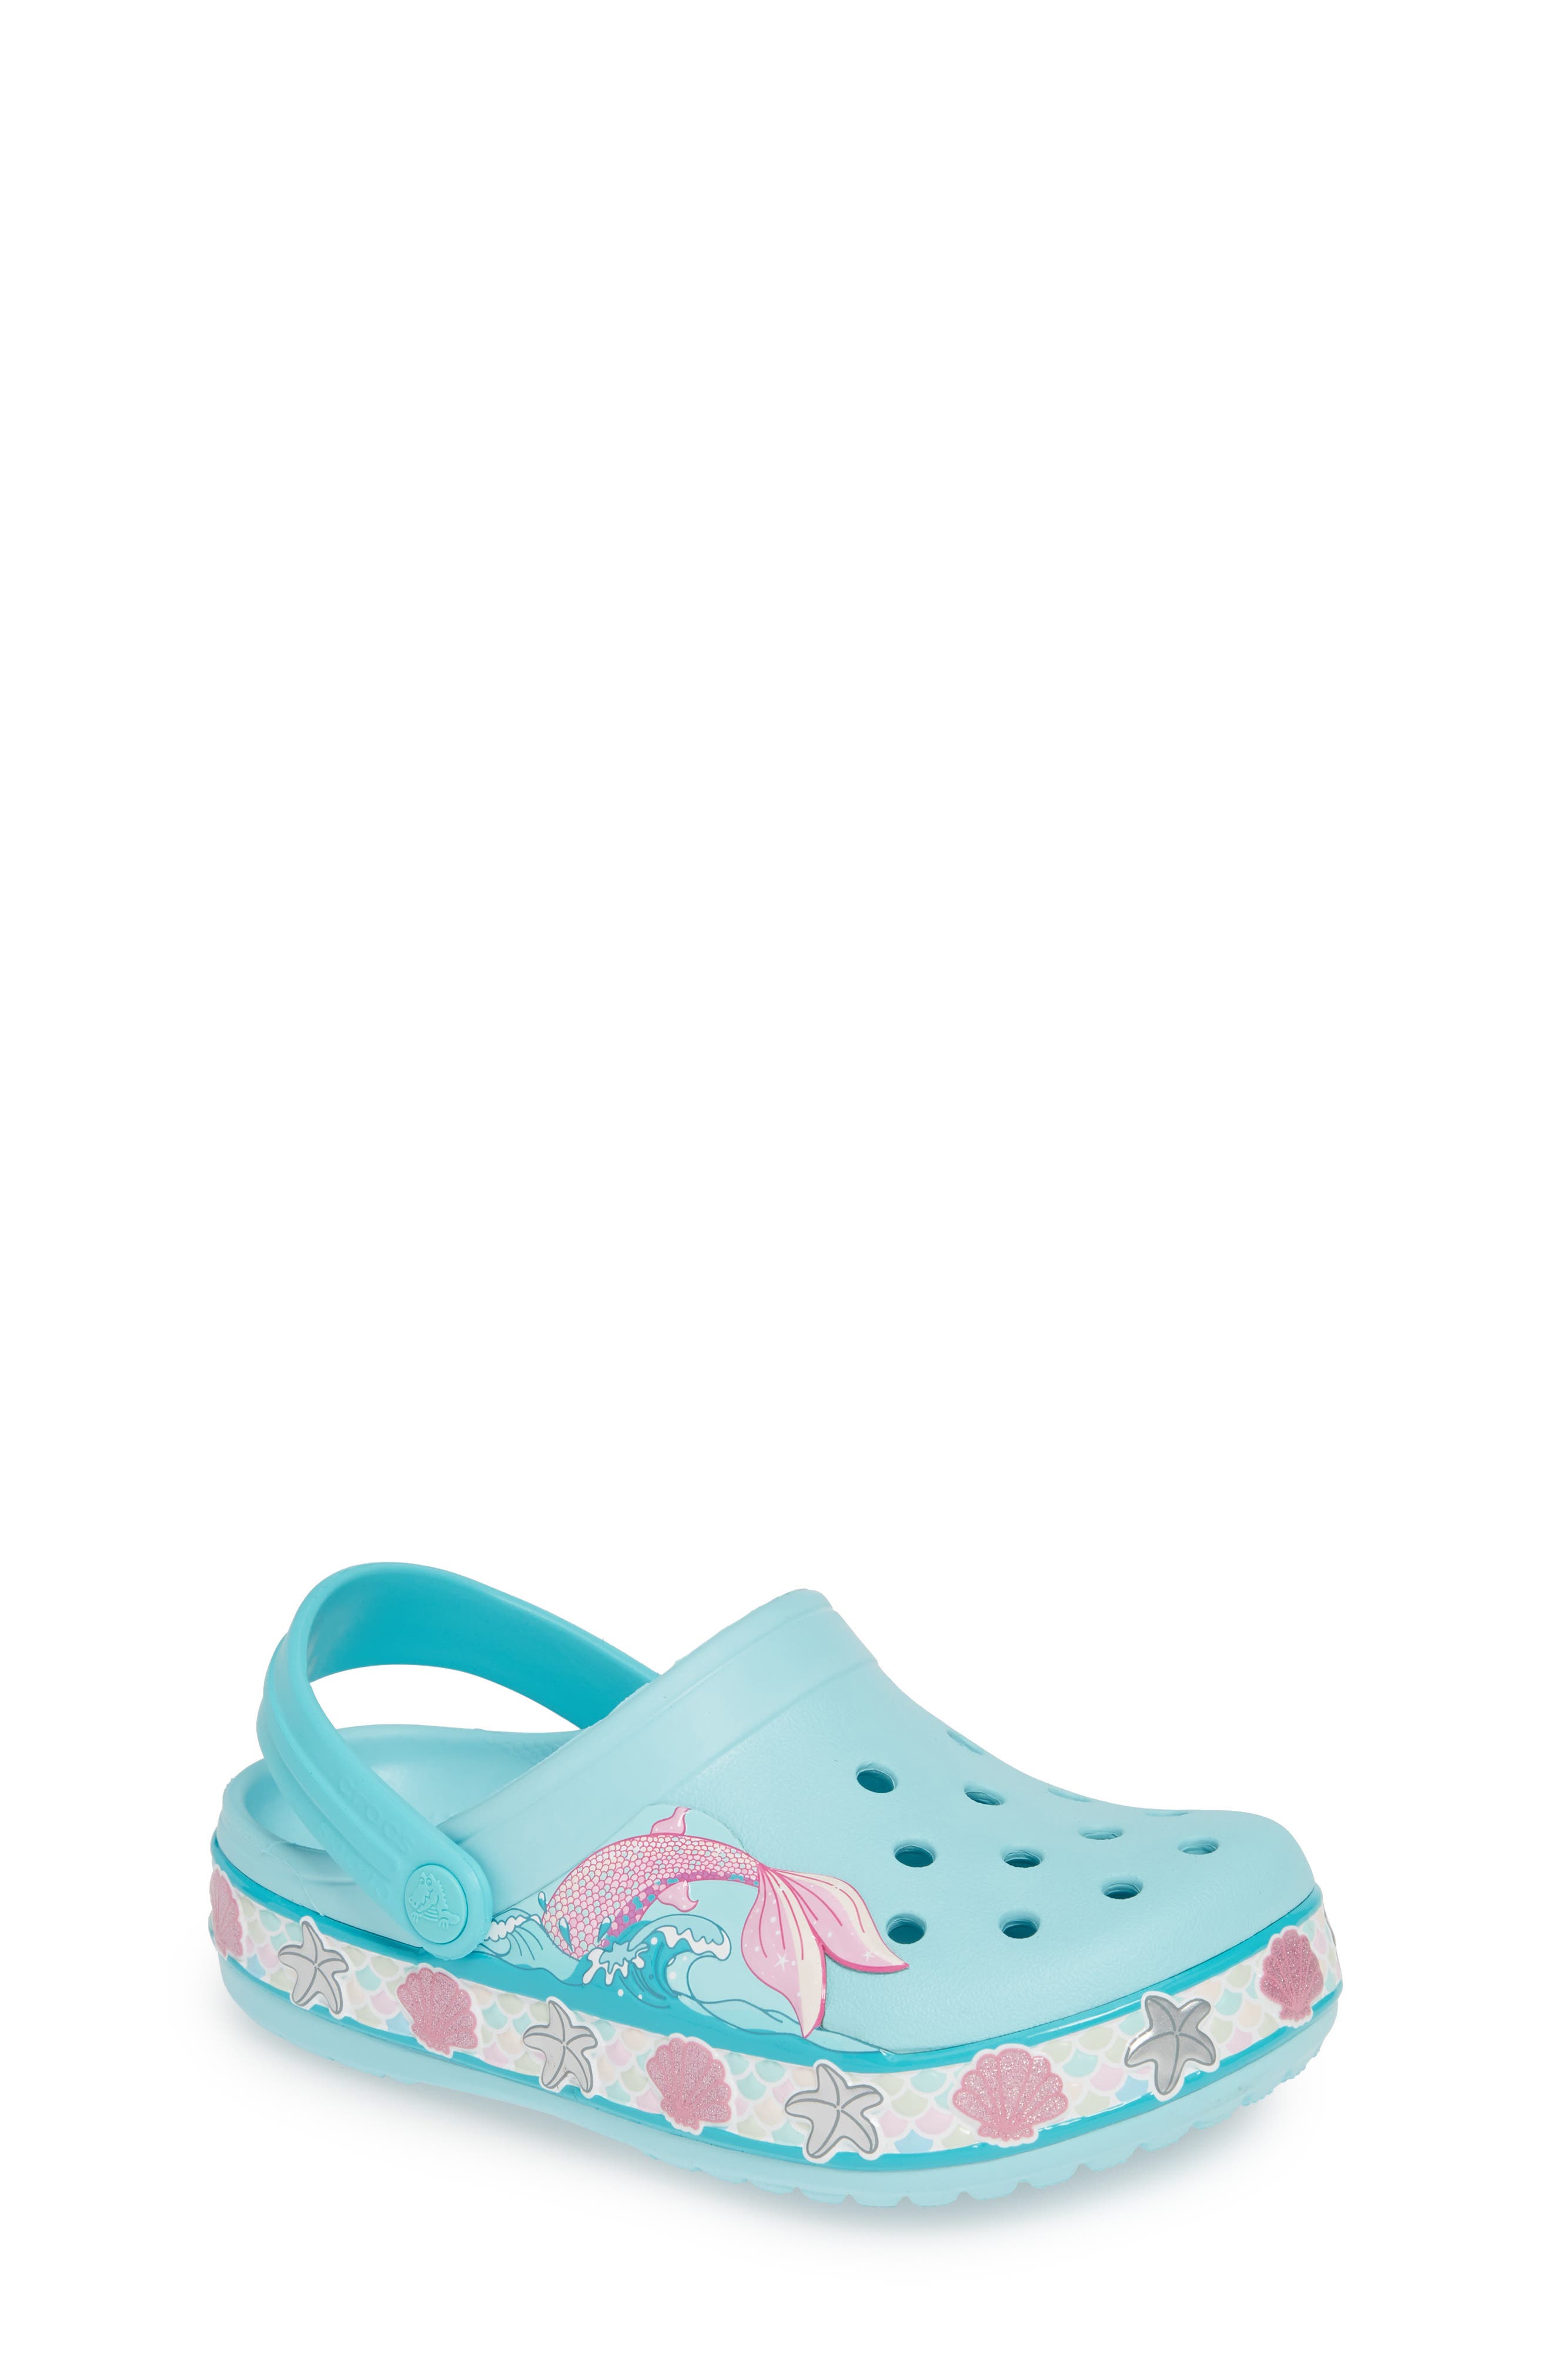 baby with crocs